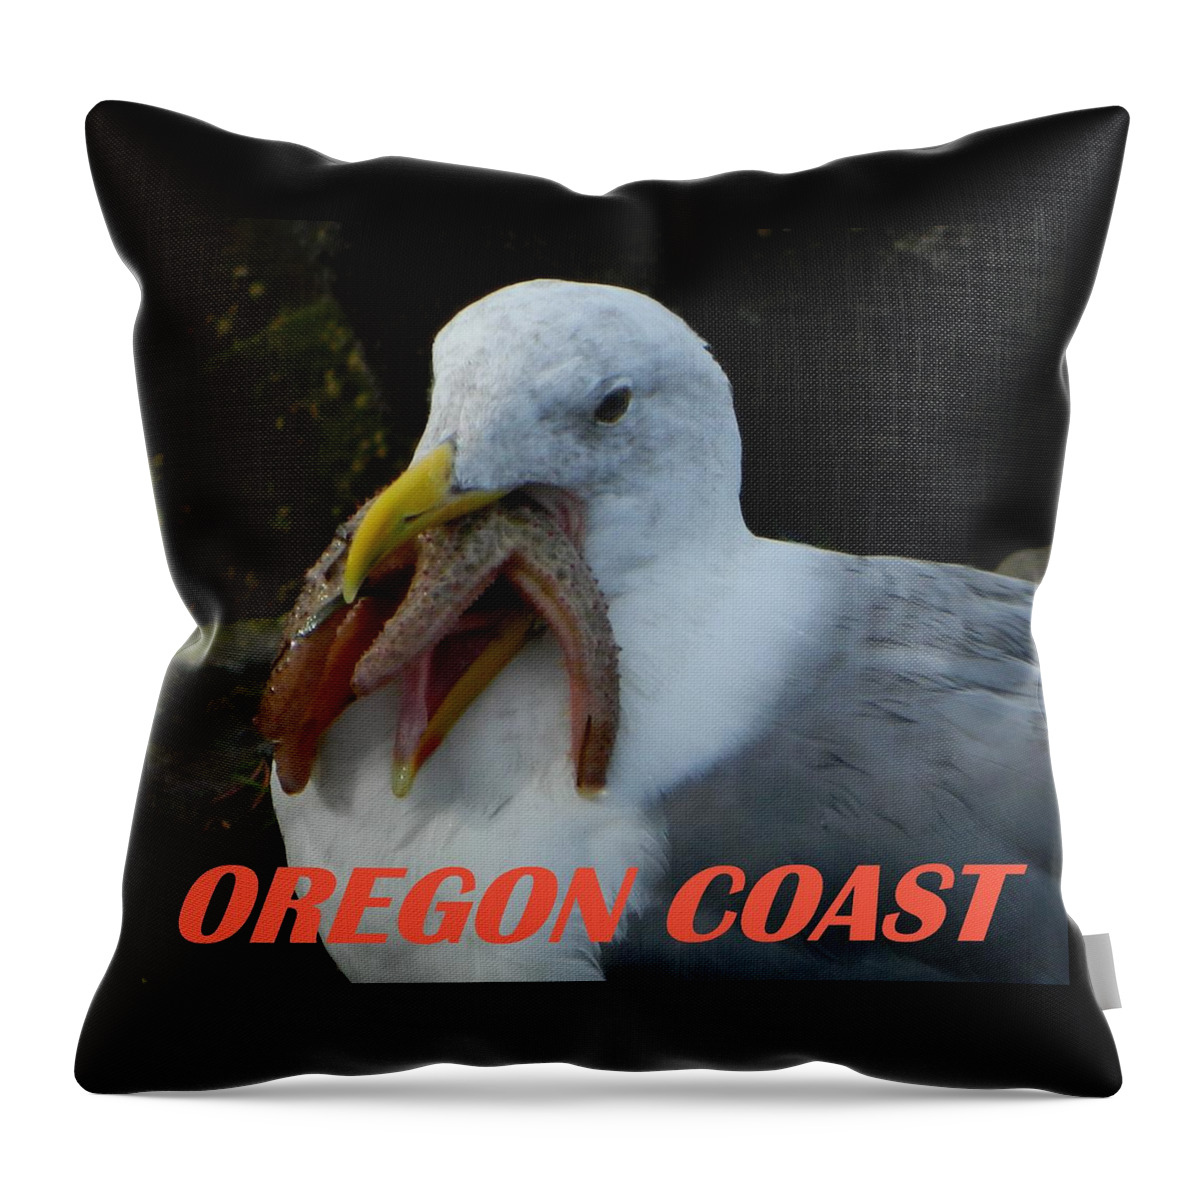 Seagull Throw Pillow featuring the photograph Oregon Coast Seagull Eating Starfish by Gallery Of Hope 